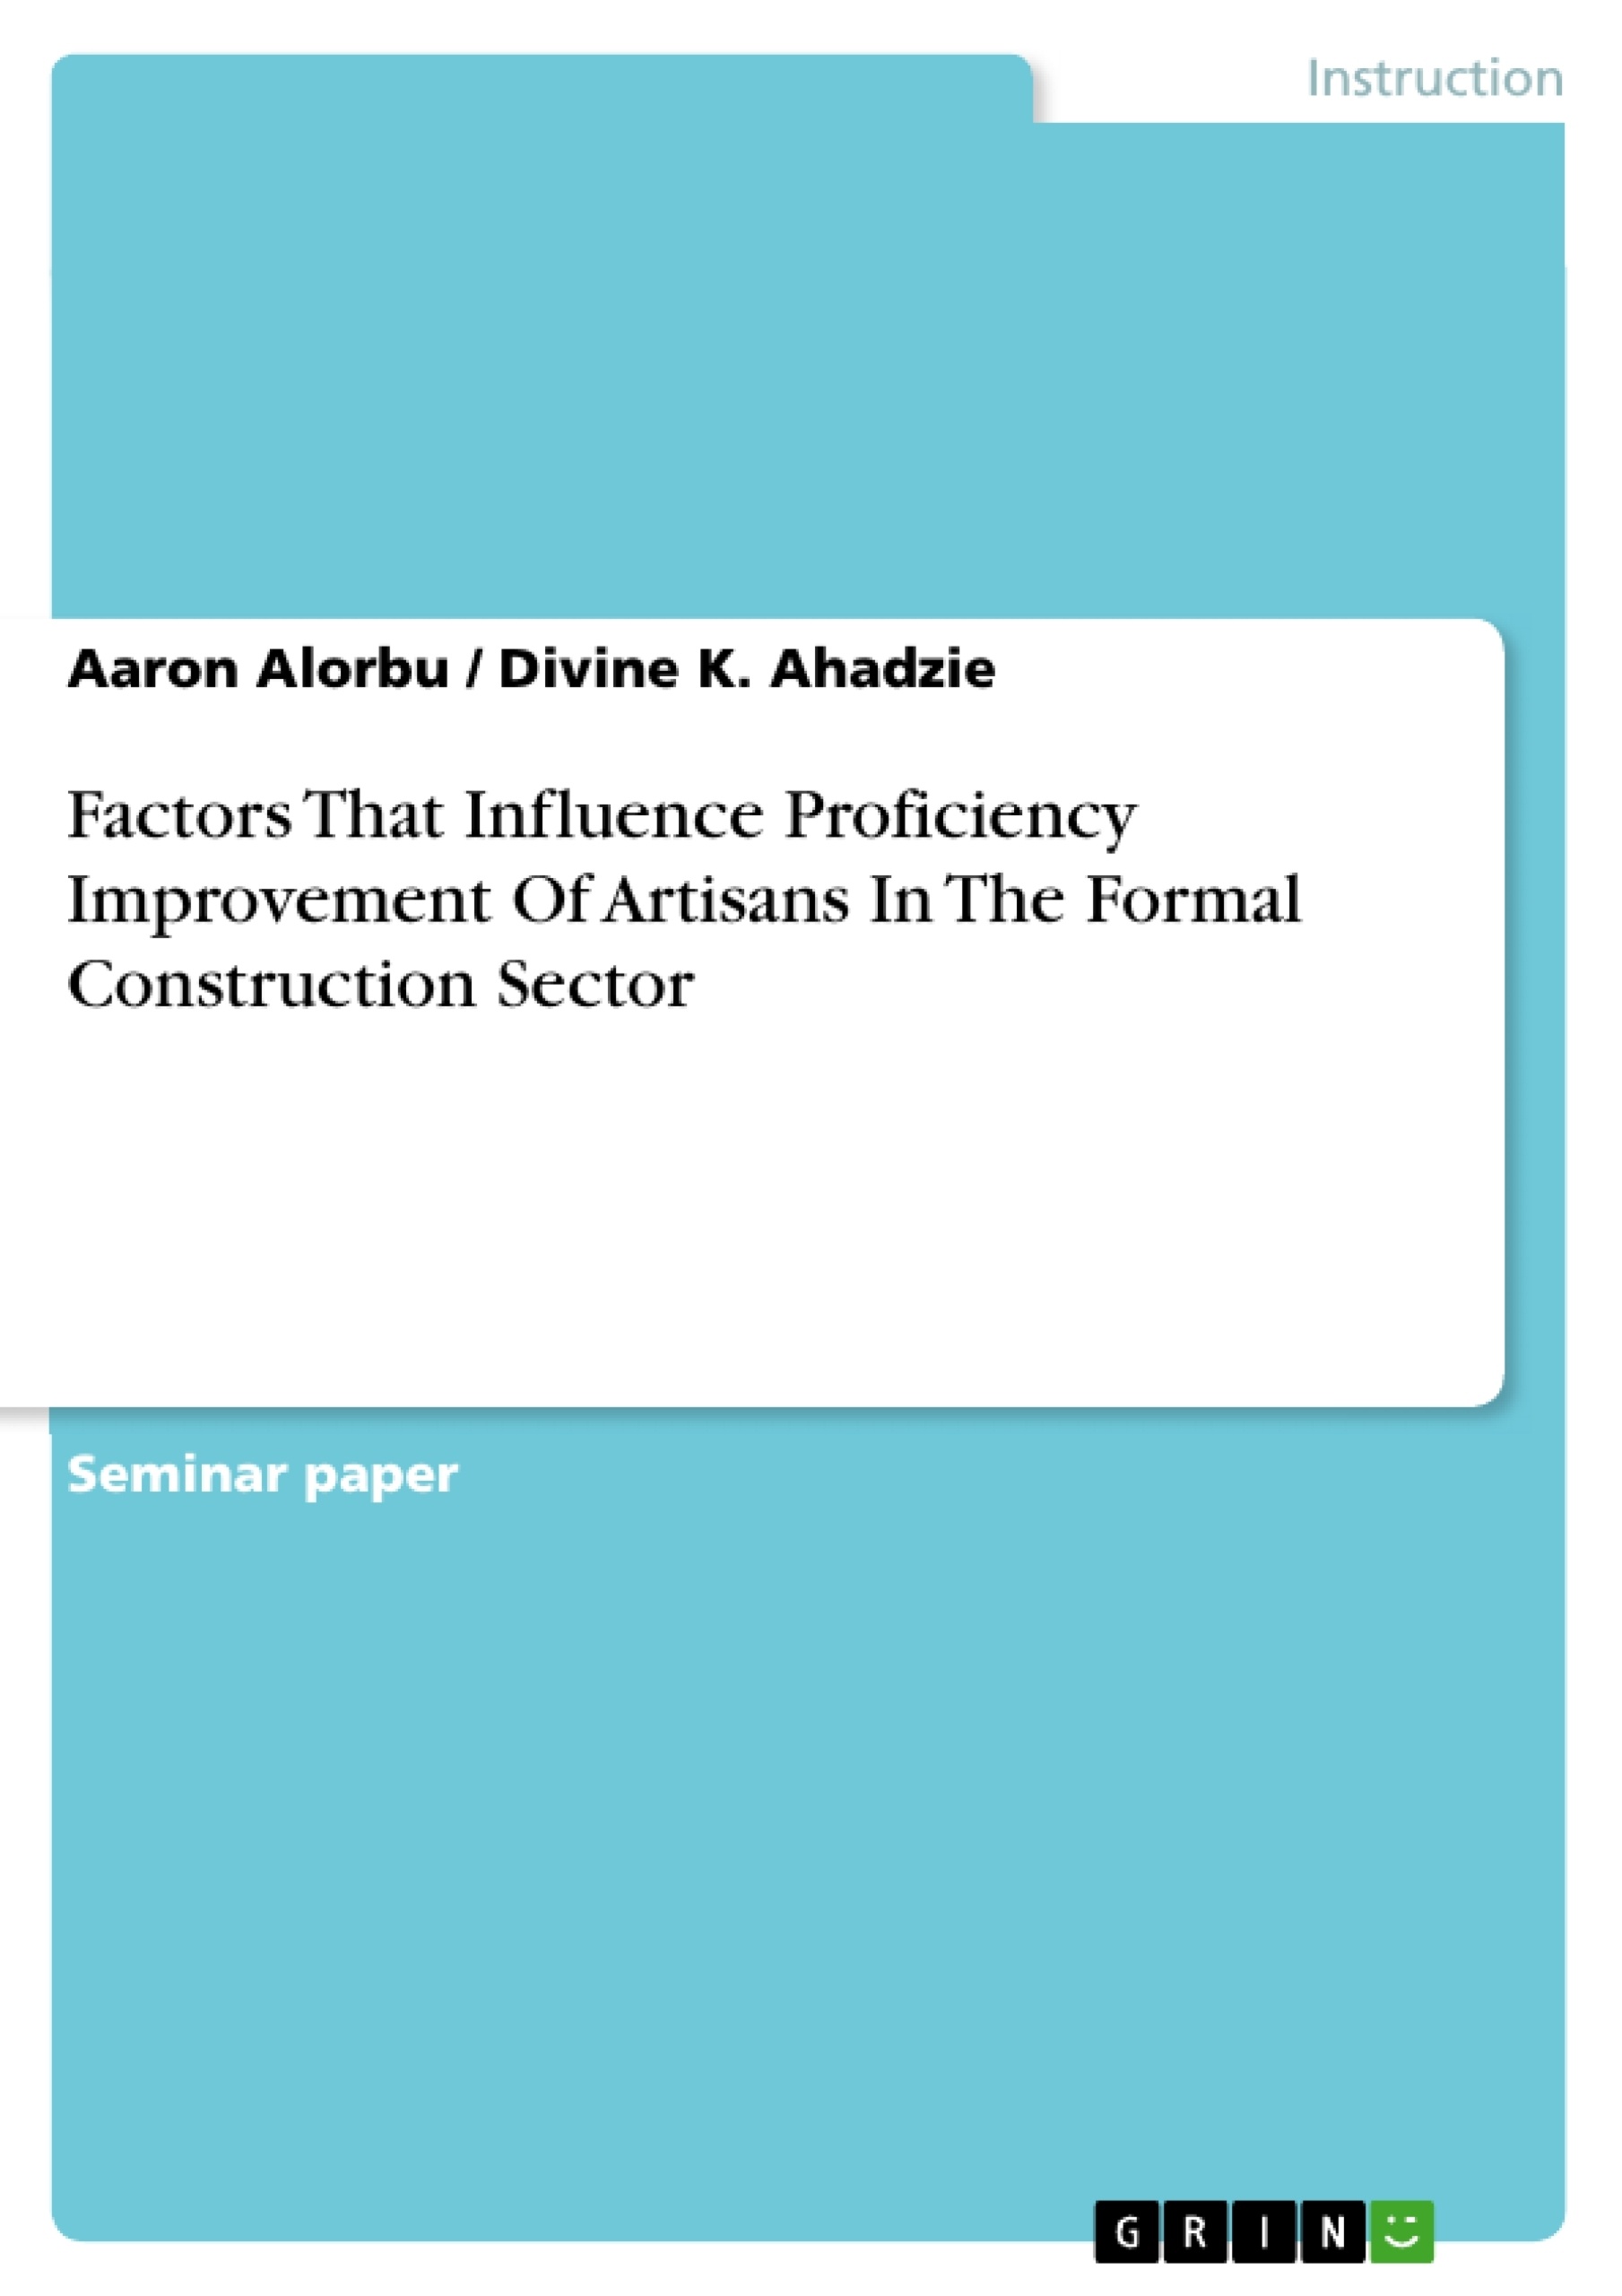 Title: Factors That Influence Proficiency Improvement Of Artisans In The Formal Construction Sector